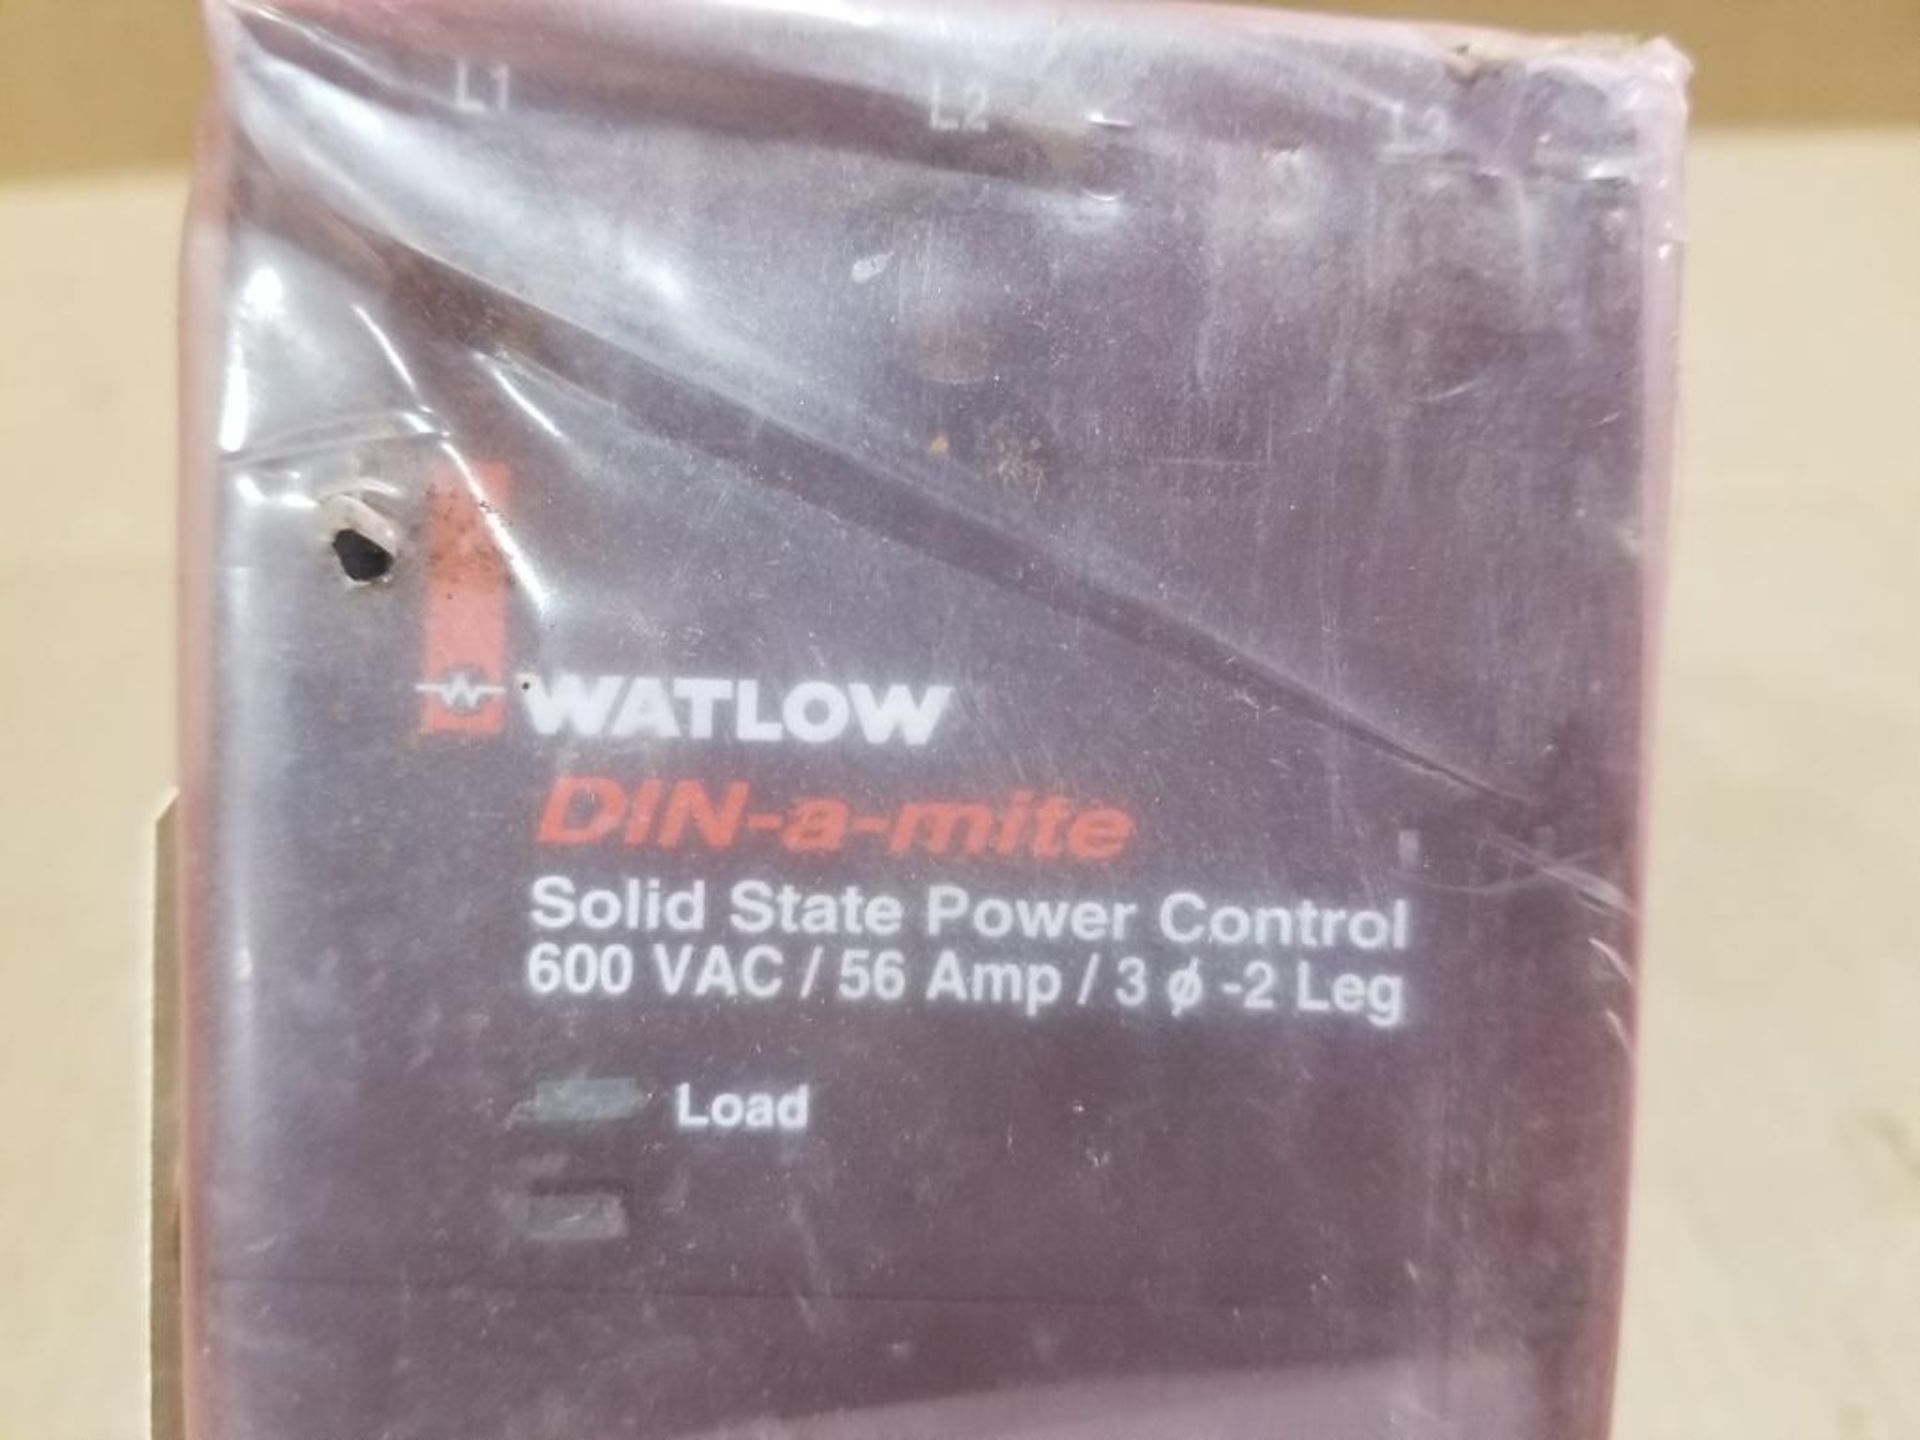 Watlow DIN-a-mite solid state power control. 600VAC. - Image 2 of 5